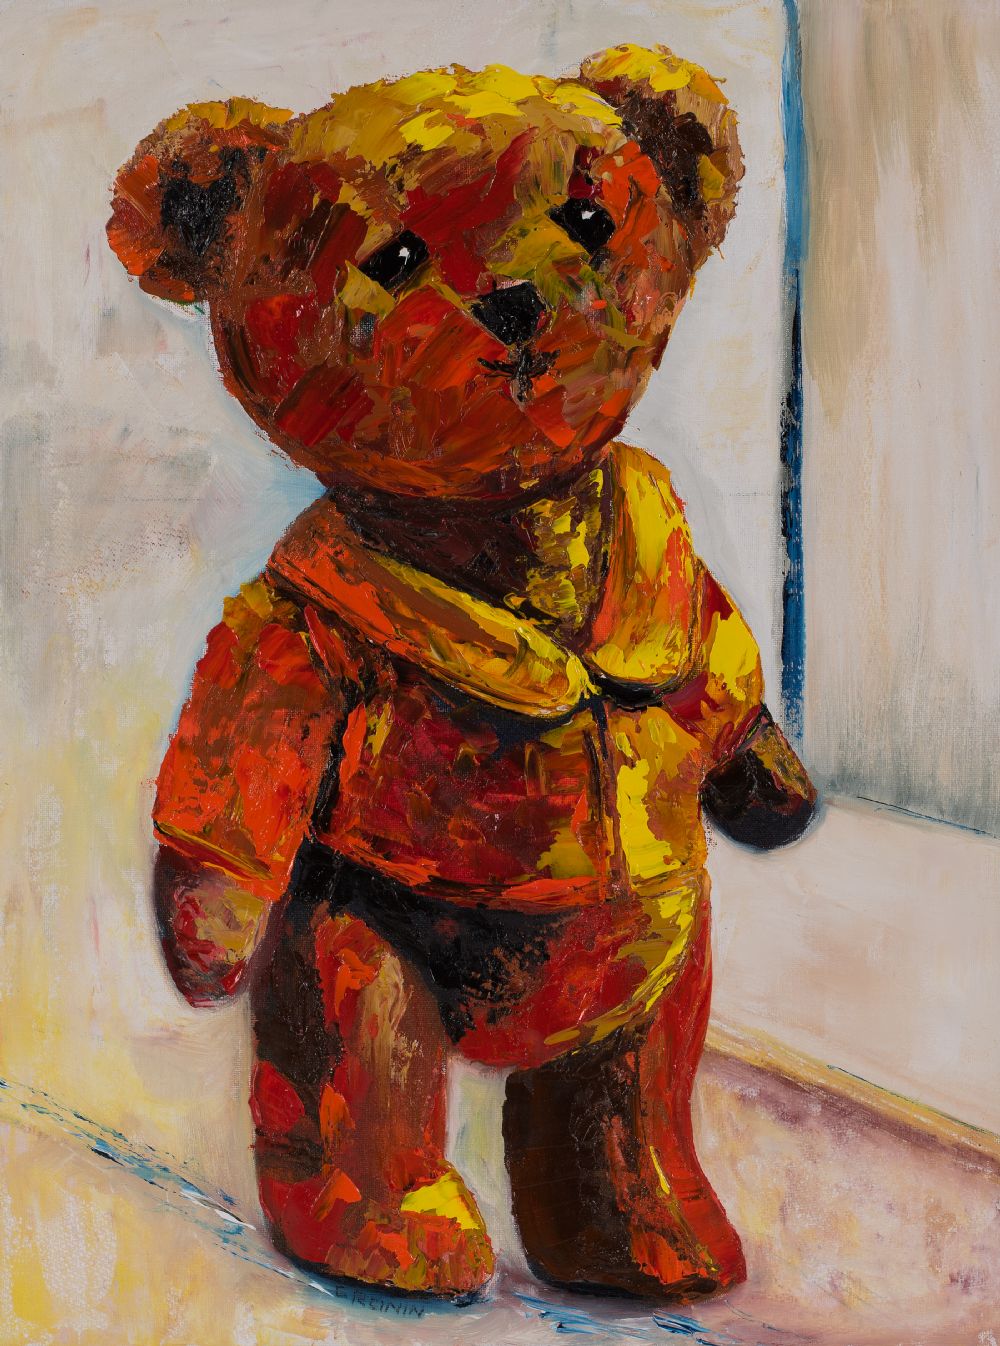 Lot 30 - GOLDEN TEDDY, OFF TO PLAY by Susan Cronin, b.1965